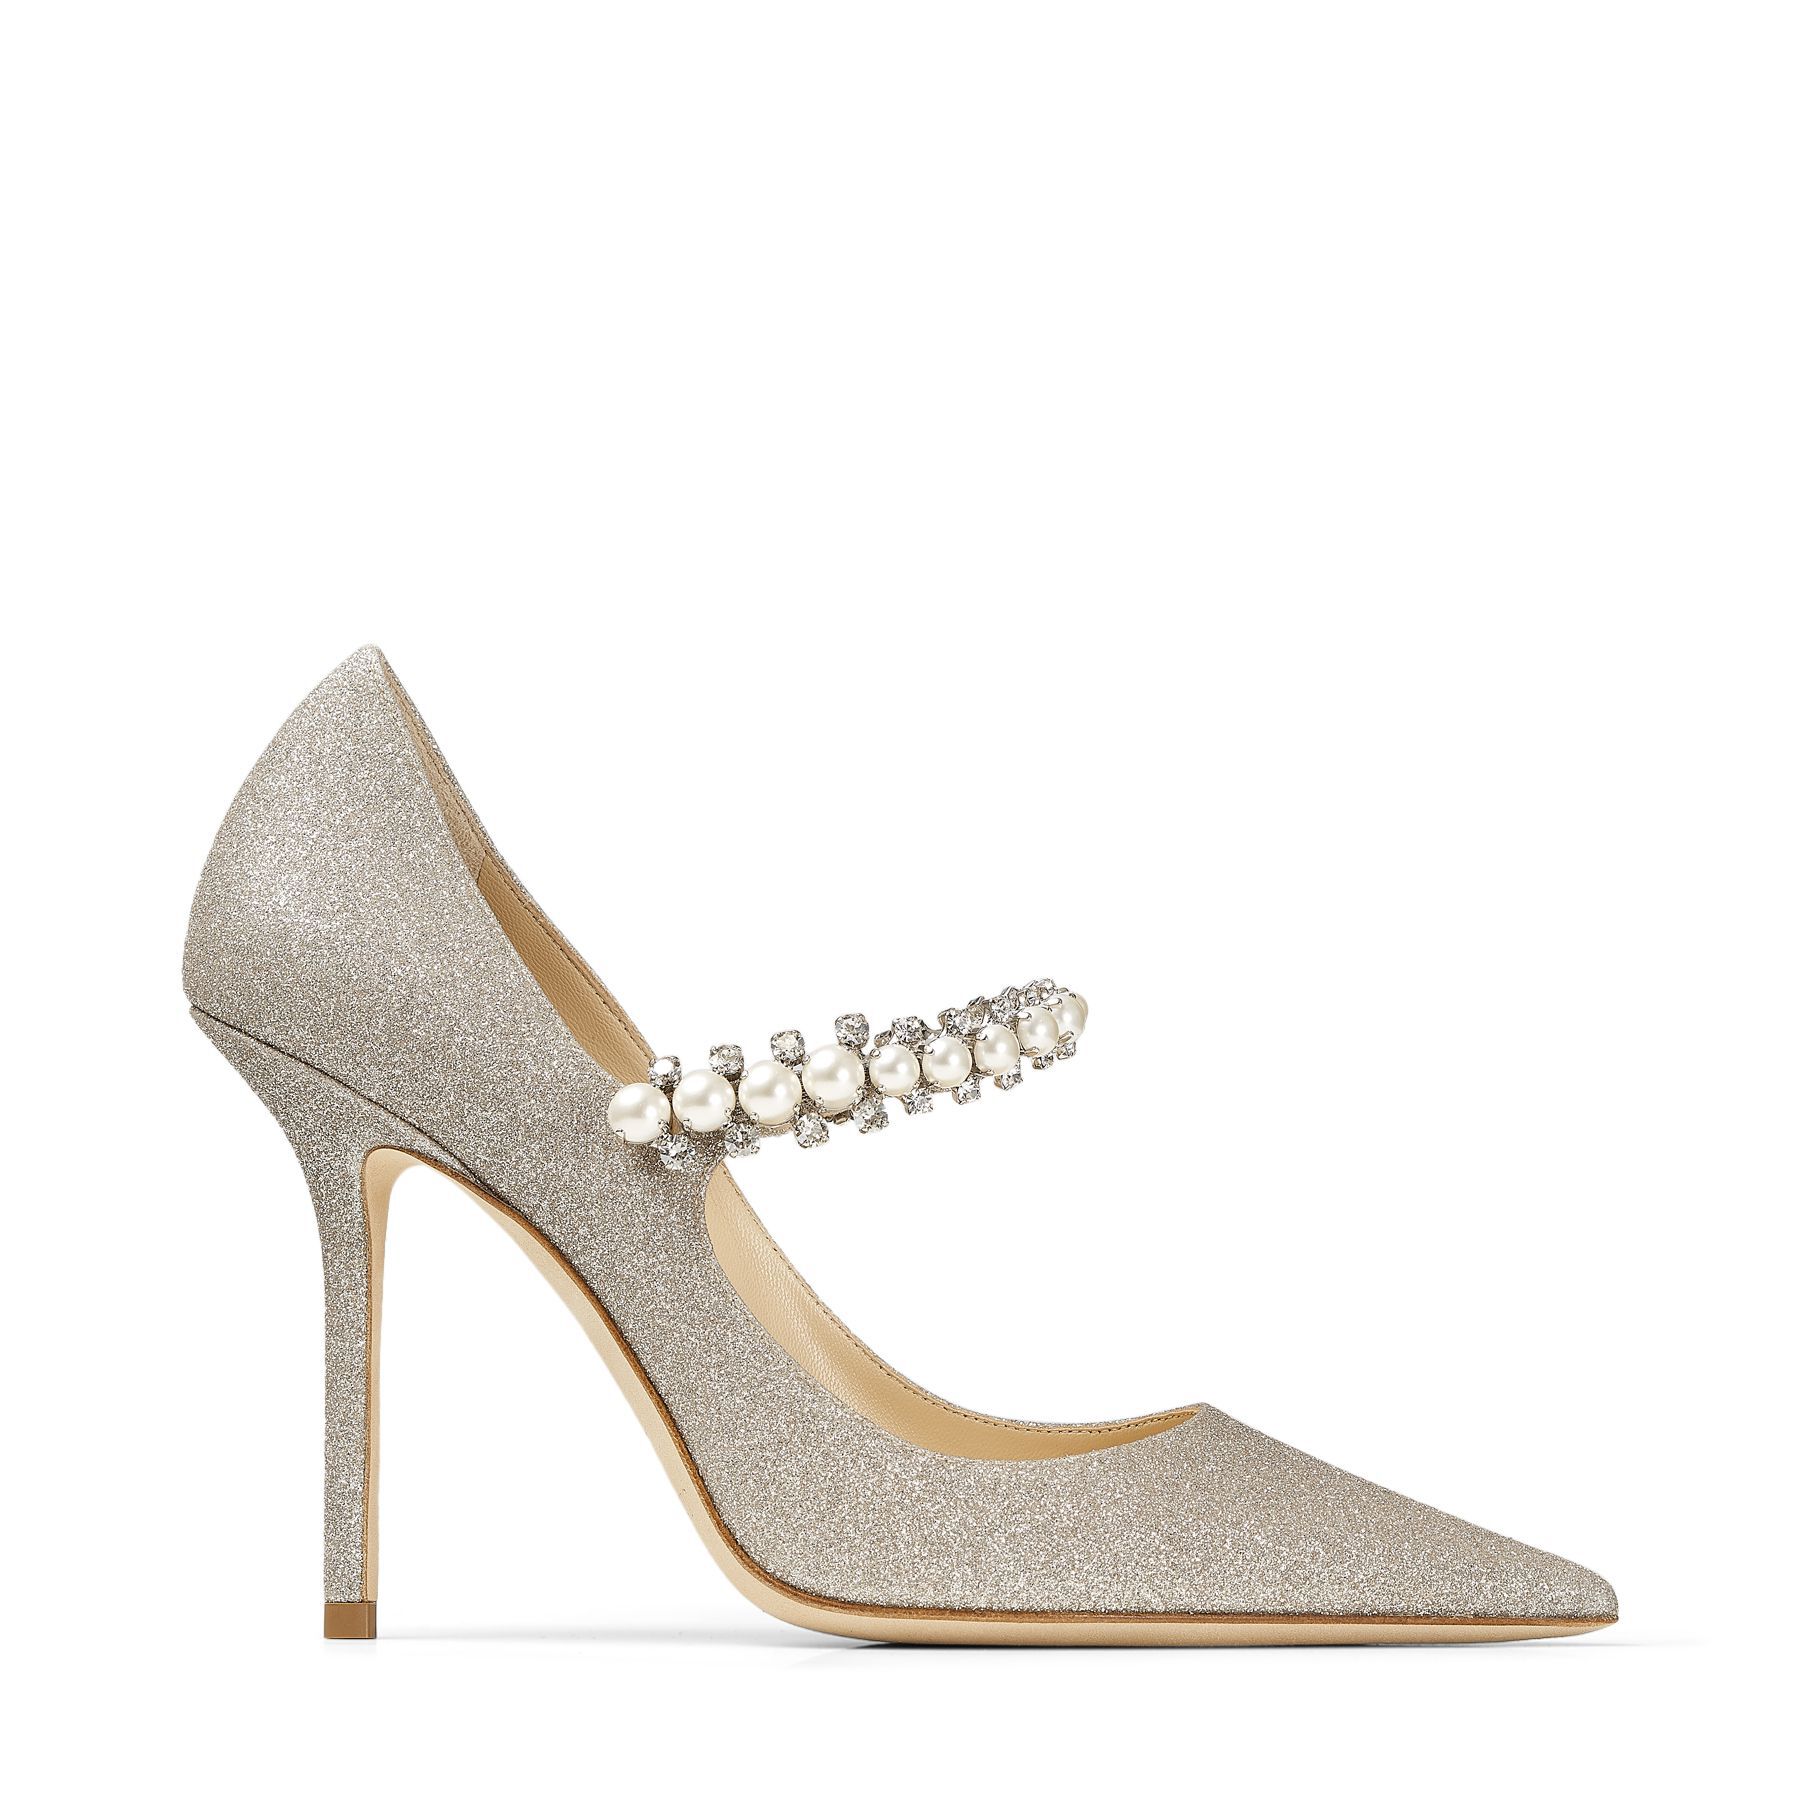 katastrofe Eastern Elemental Platinum Ice Dusty Glitter Pumps with Crystal and Pearl Strap | BAILY 100 |  Spring Summer 2021 | JIMMY CHOO